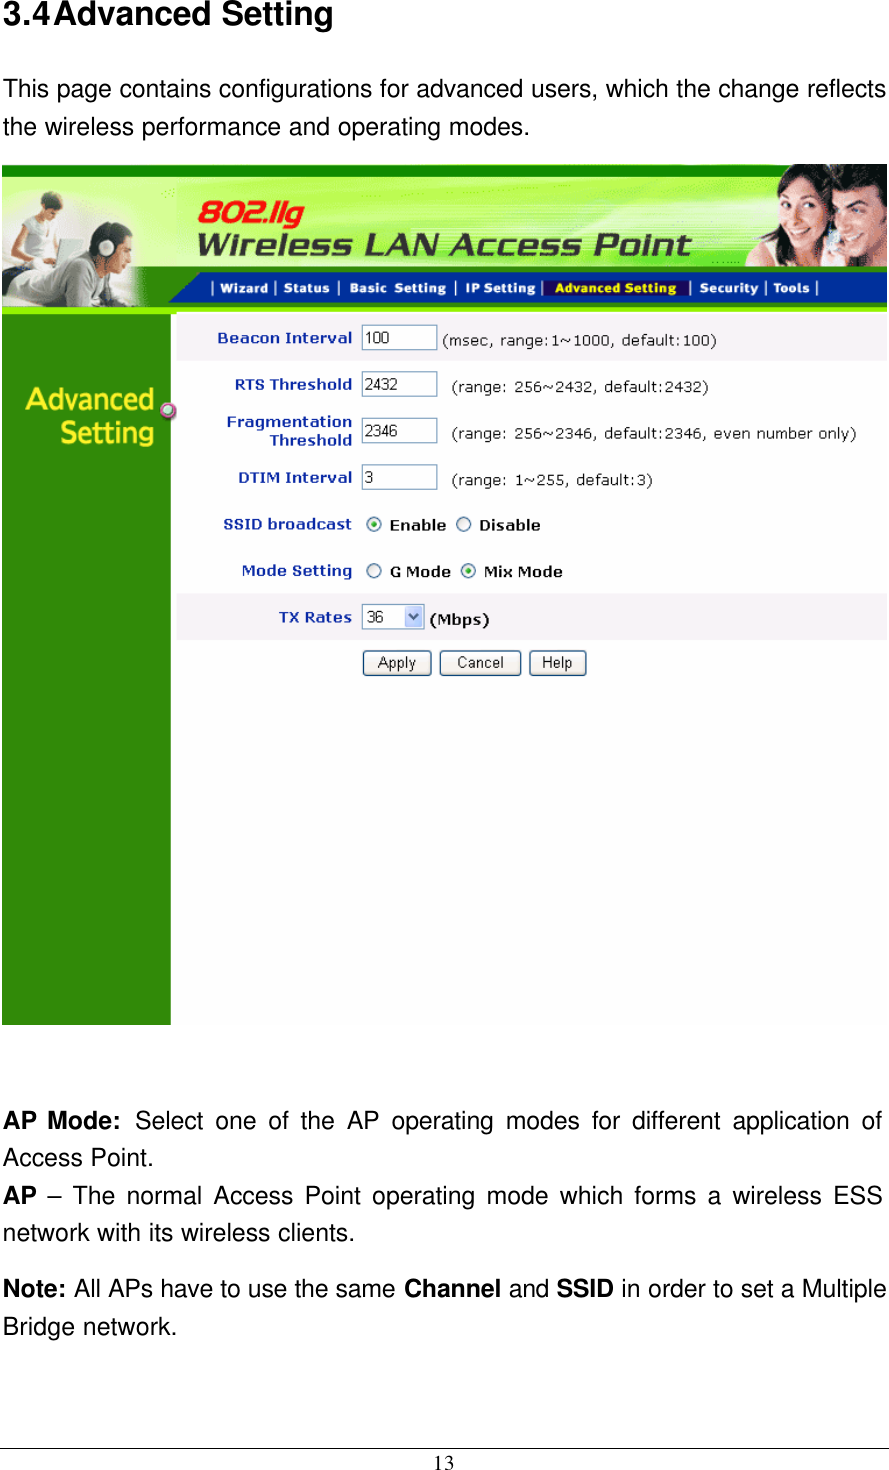  13 3.4 Advanced Setting This page contains configurations for advanced users, which the change reflects the wireless performance and operating modes.   AP Mode:  Select one of the AP operating modes for different application of Access Point. AP – The normal Access Point operating mode which forms a wireless ESS network with its wireless clients. Note: All APs have to use the same Channel and SSID in order to set a Multiple Bridge network.  